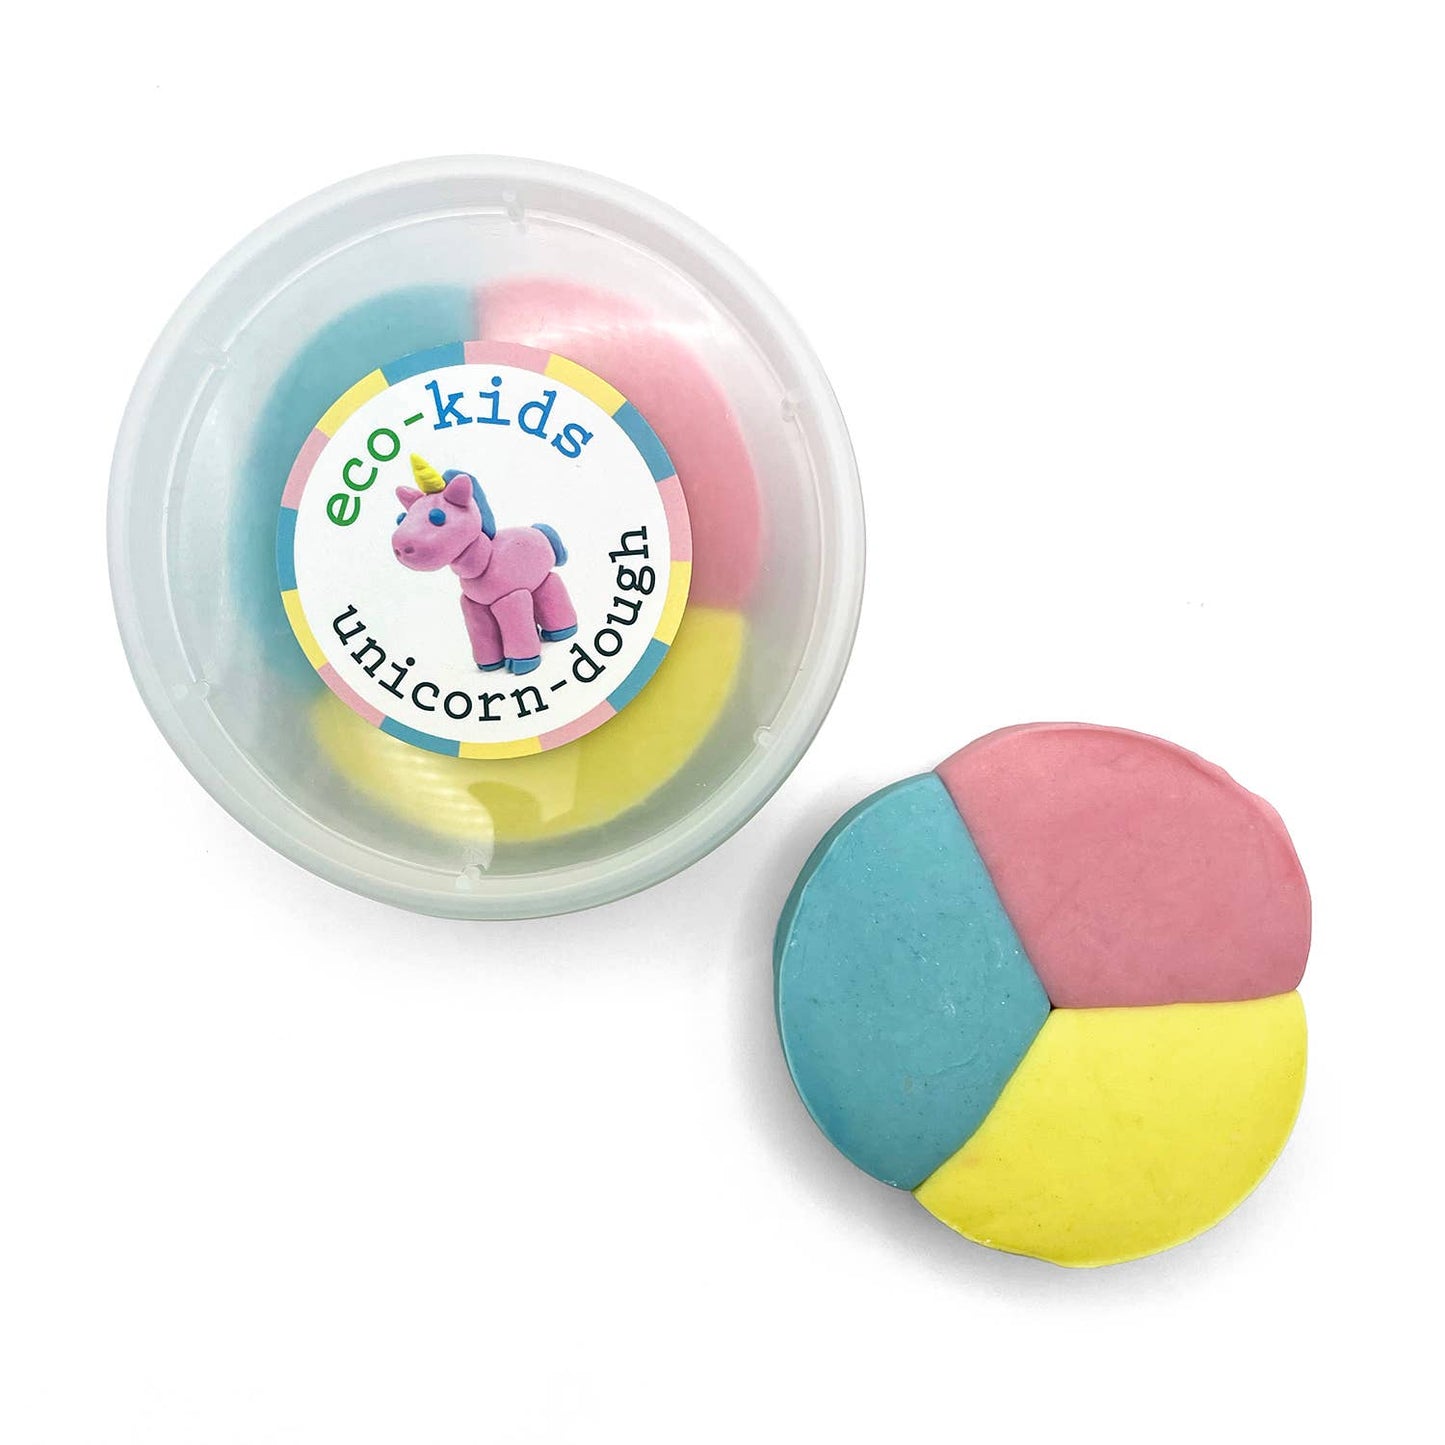 eco-kids - unicorn theme play dough  eco-kids   -better made easy-eco-friendly-sustainable-gifting